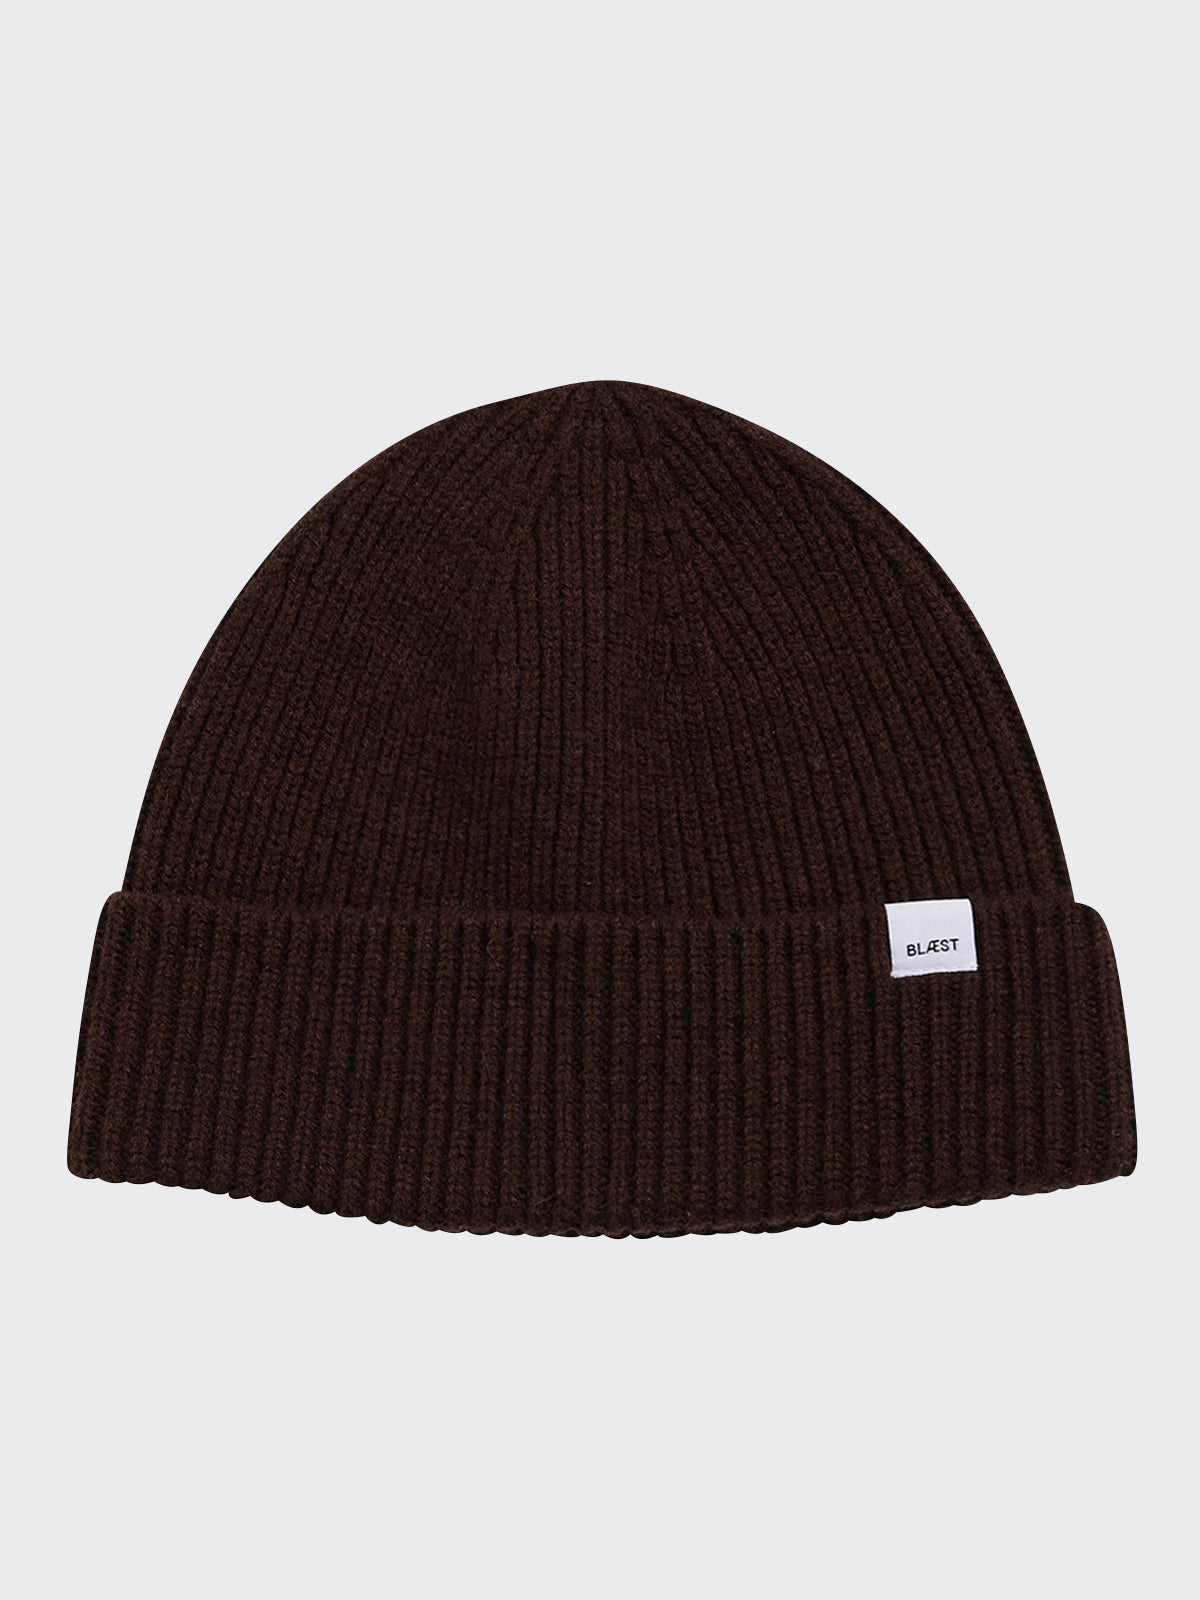 Beanie from Blæst in the color Java